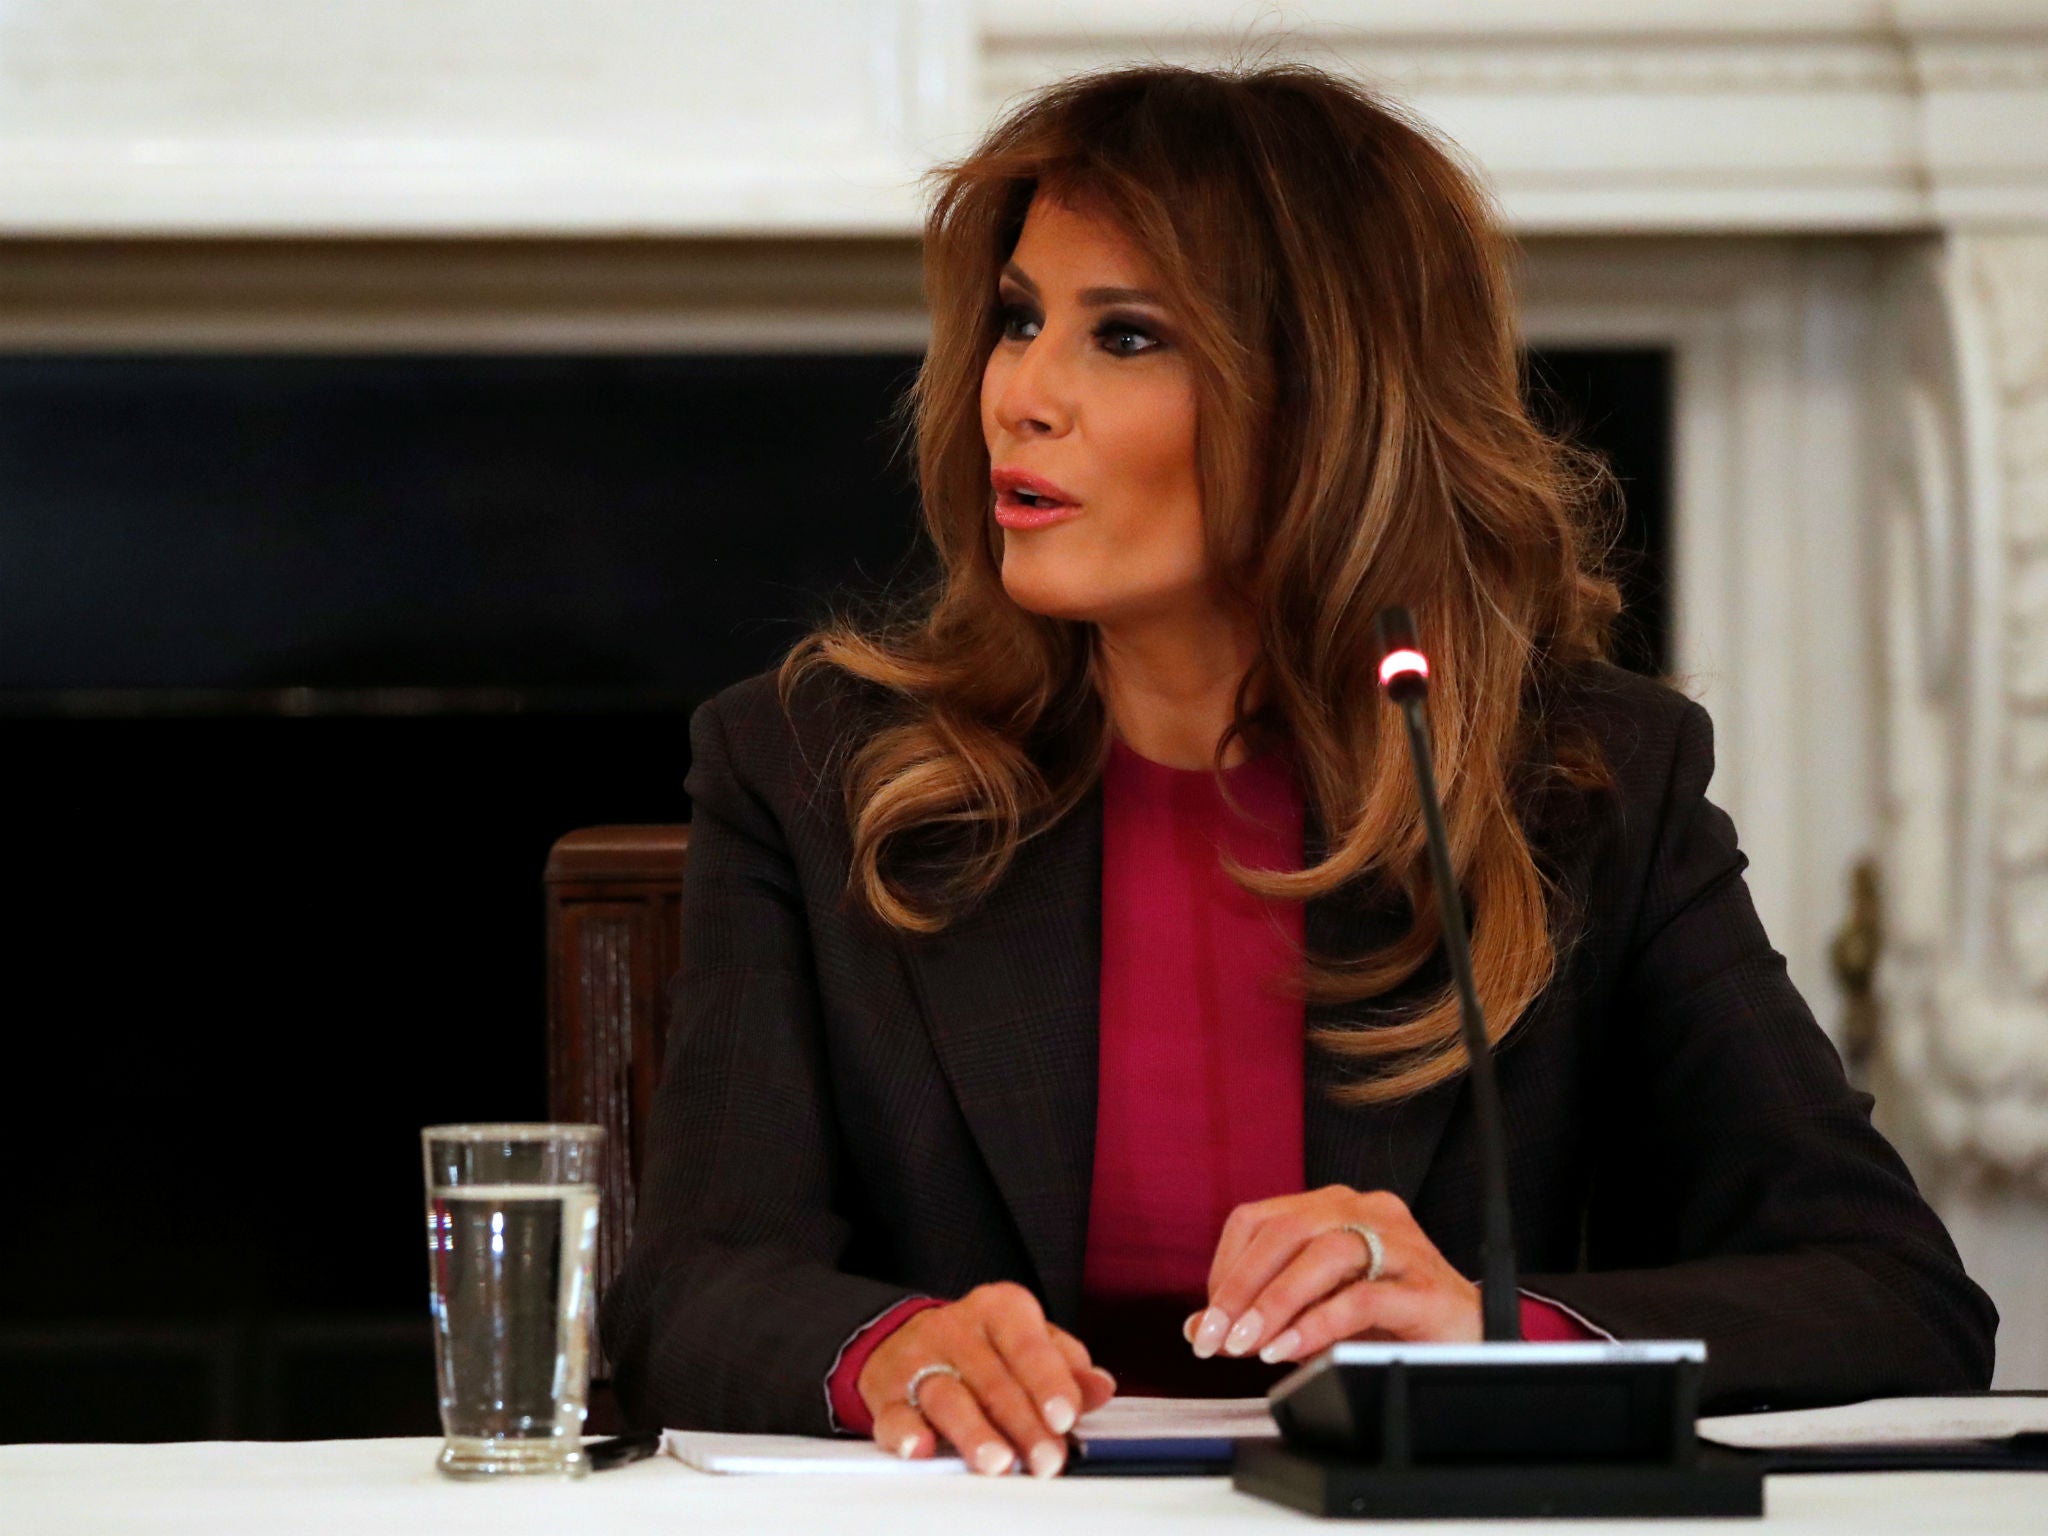 Melania Trump has not made a public appearance since her recent hospital stay